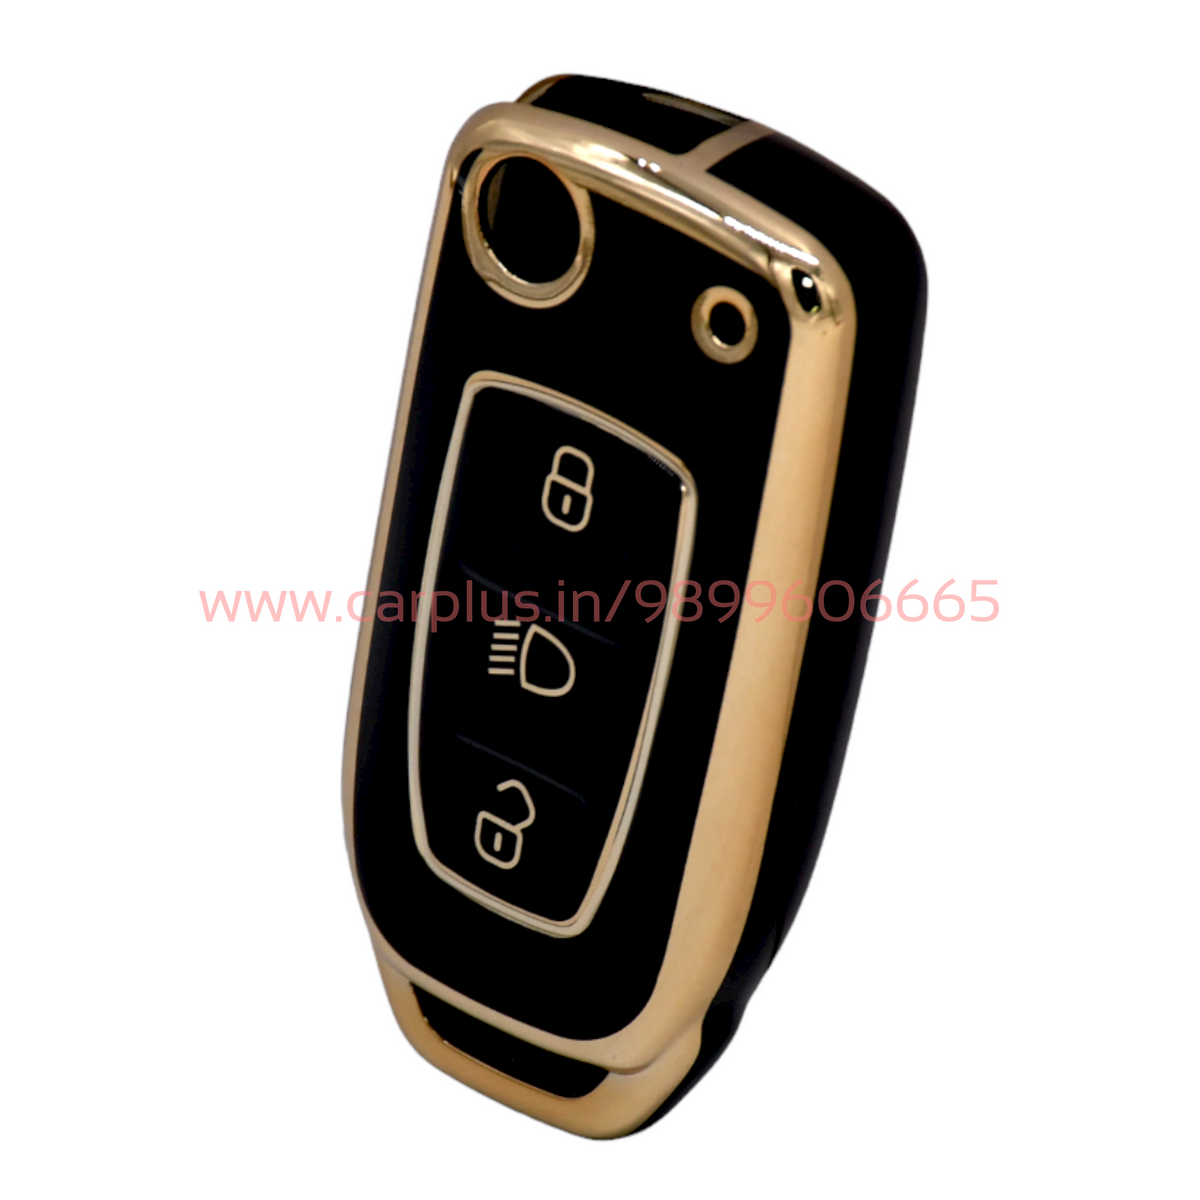  kwmobile Key Cover Compatible with Fiat Lancia 3 Button Car  Flip Key Key Cover - Car Key Fob Case Protector - Black/Gold : Automotive